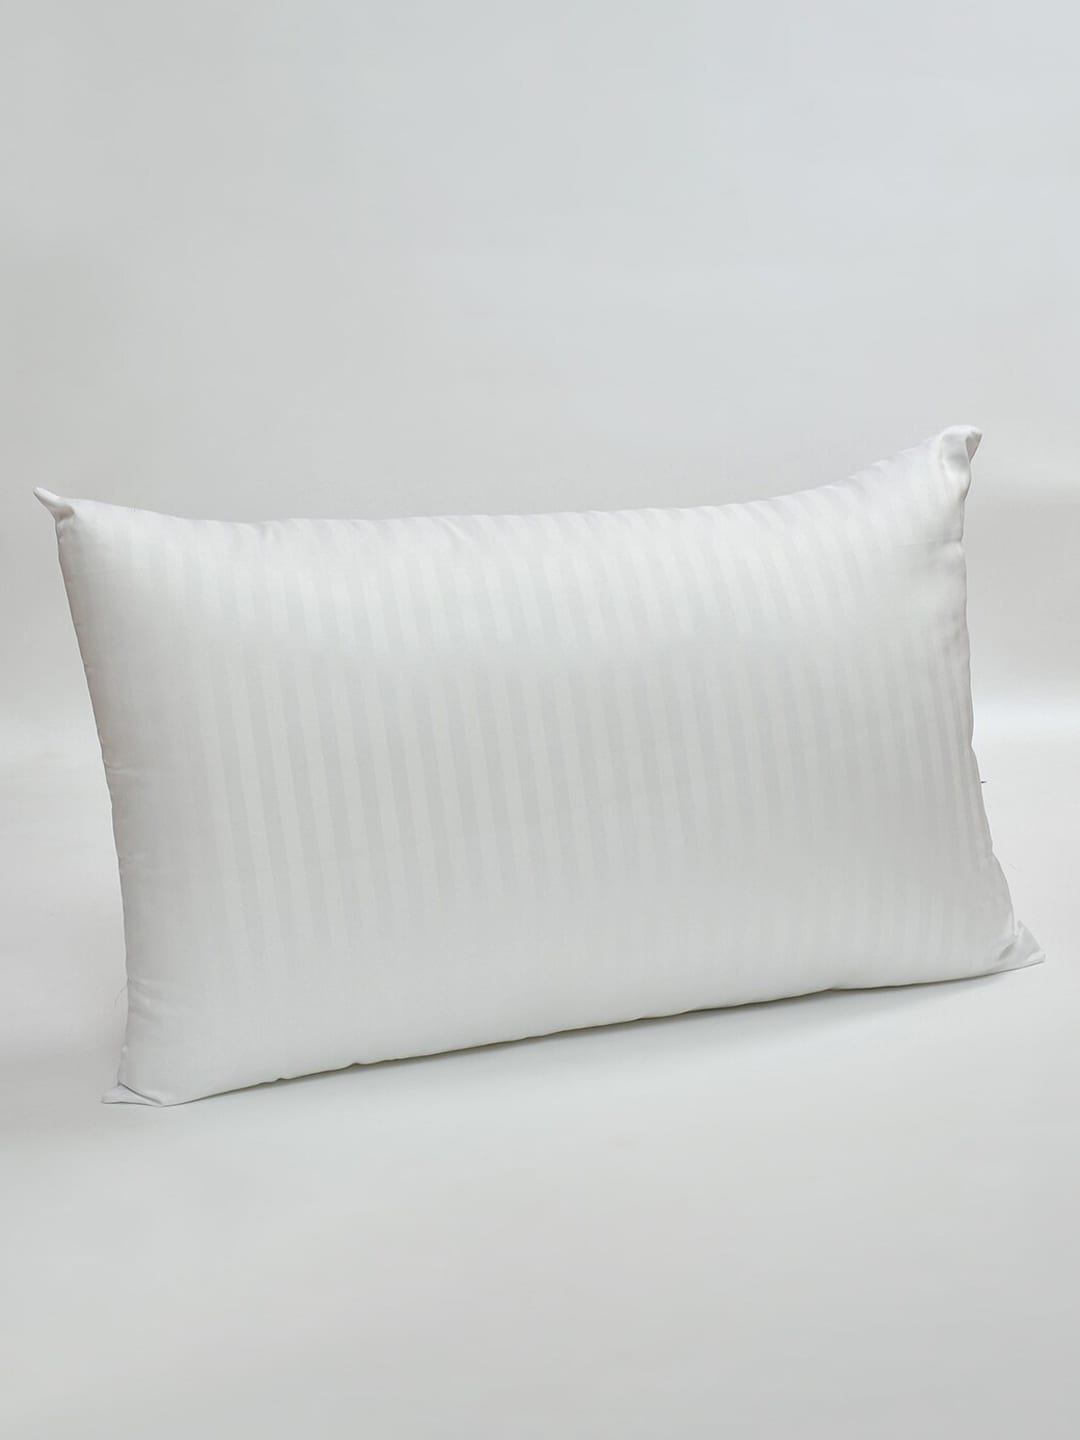 Florida White Self Design Ace 650 GSM Soft Fluffy Sleeping Pillow Price in India